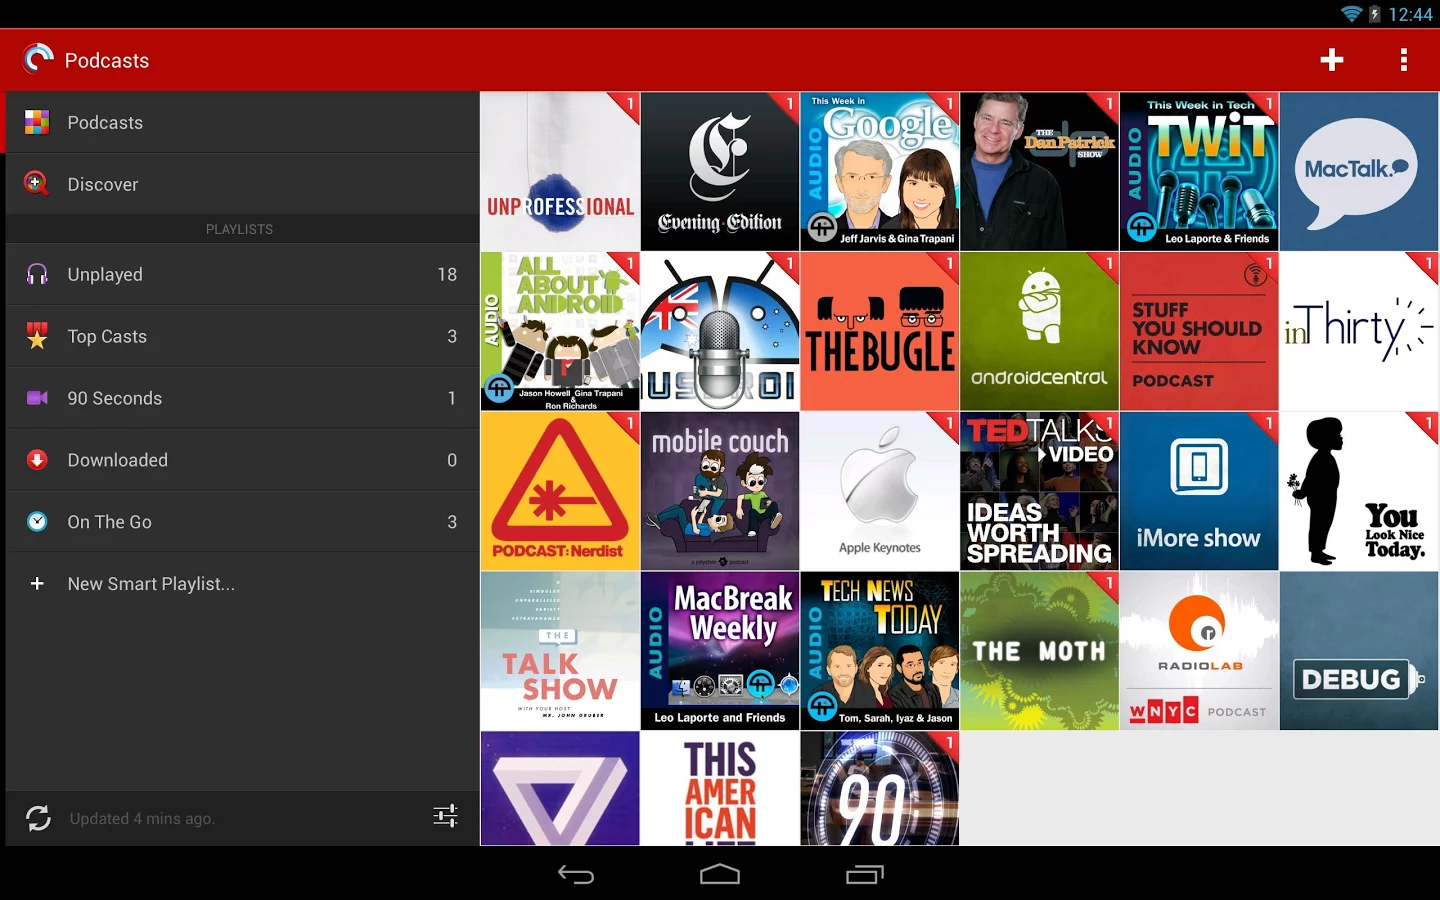 Streamline All Your Favorite Podcasts On One Platform With Pocket Casts